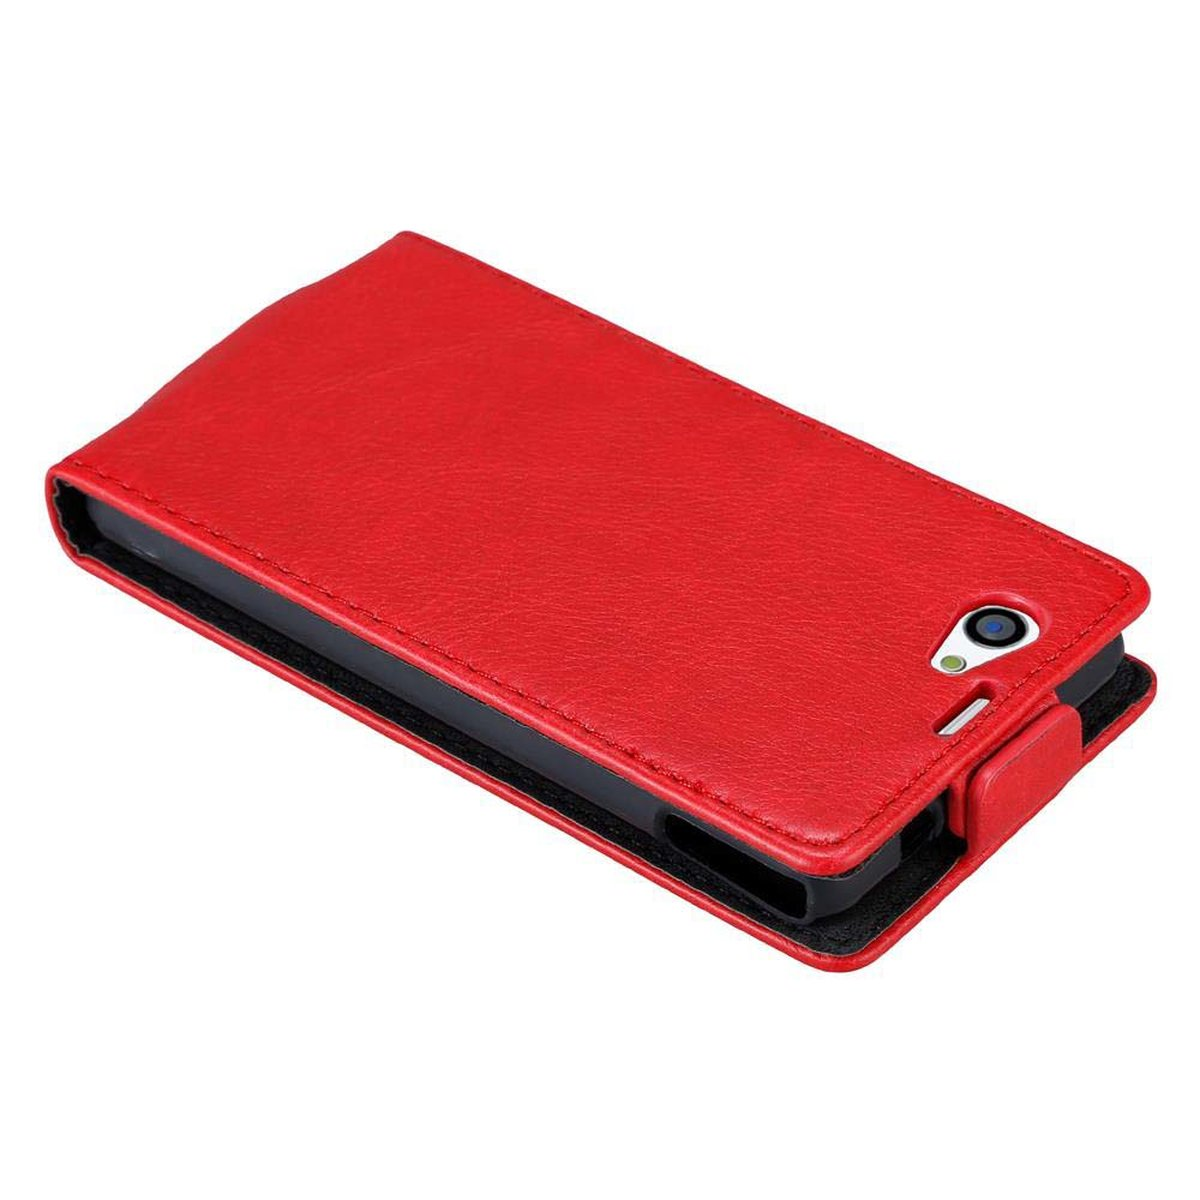 APFEL Flip COMPACT, Sony, Z1 Cover, Xperia Hülle Style, Flip CADORABO im ROT